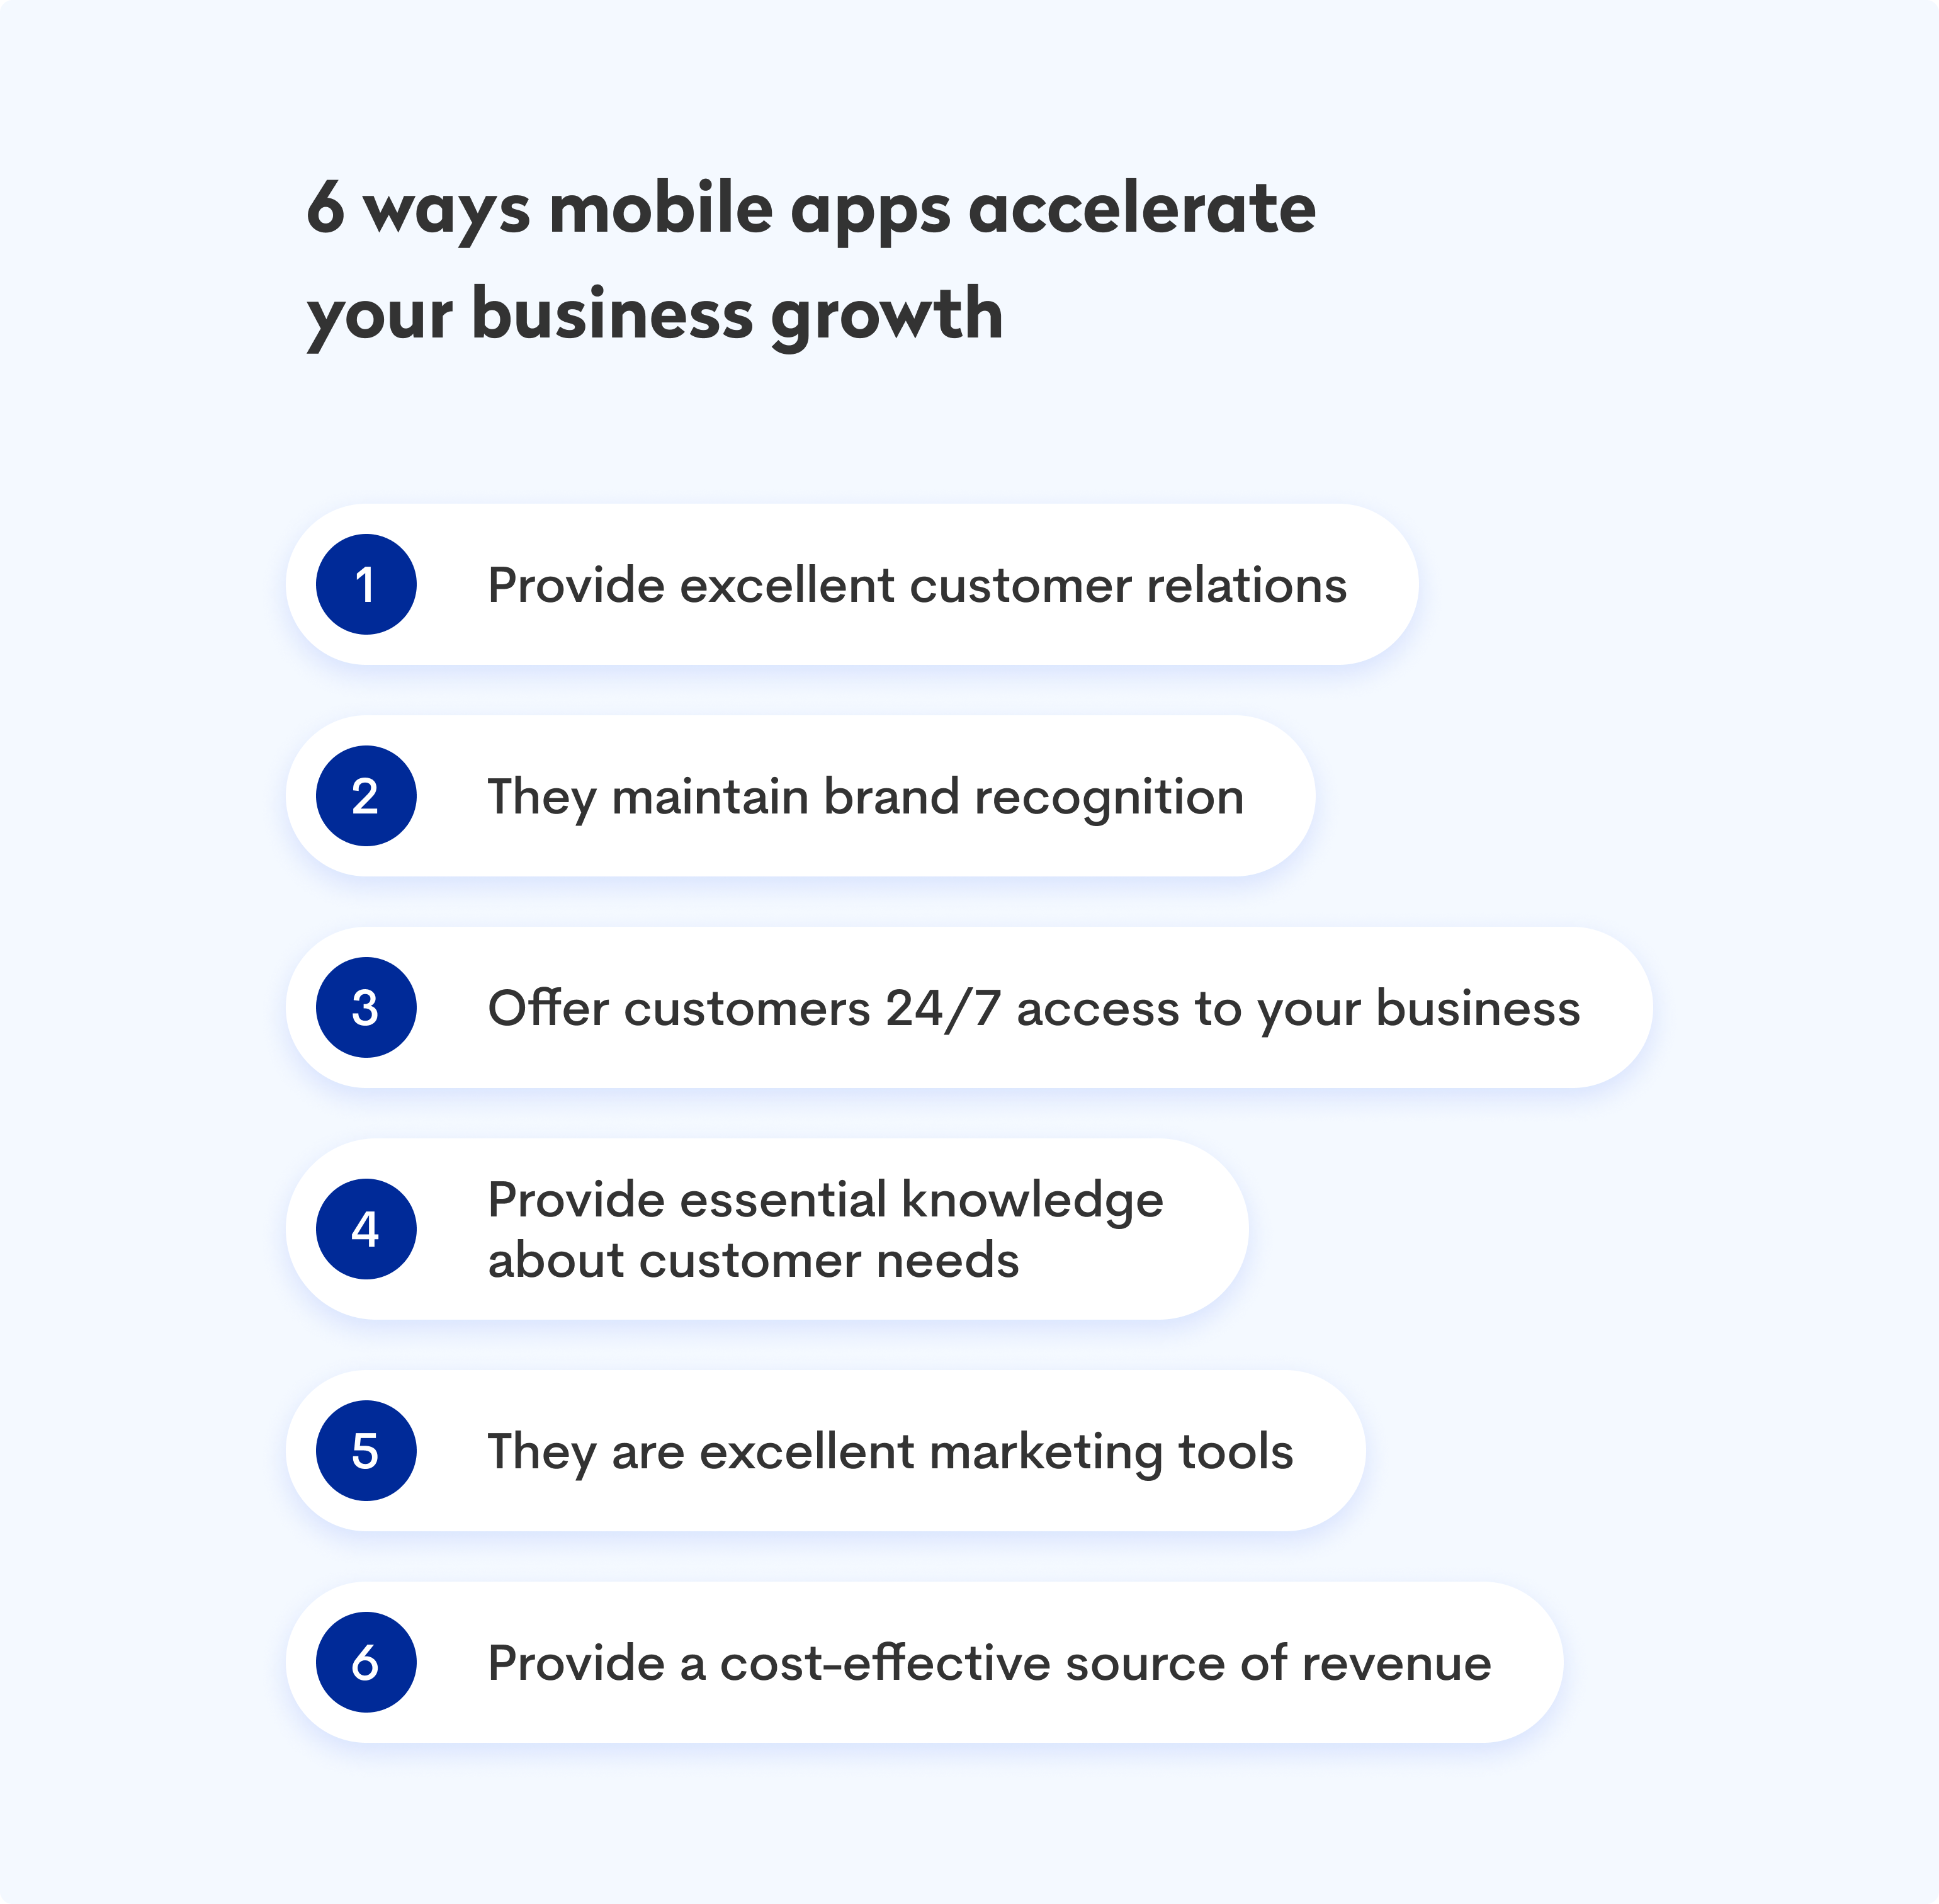 Mobile apps generate business growth